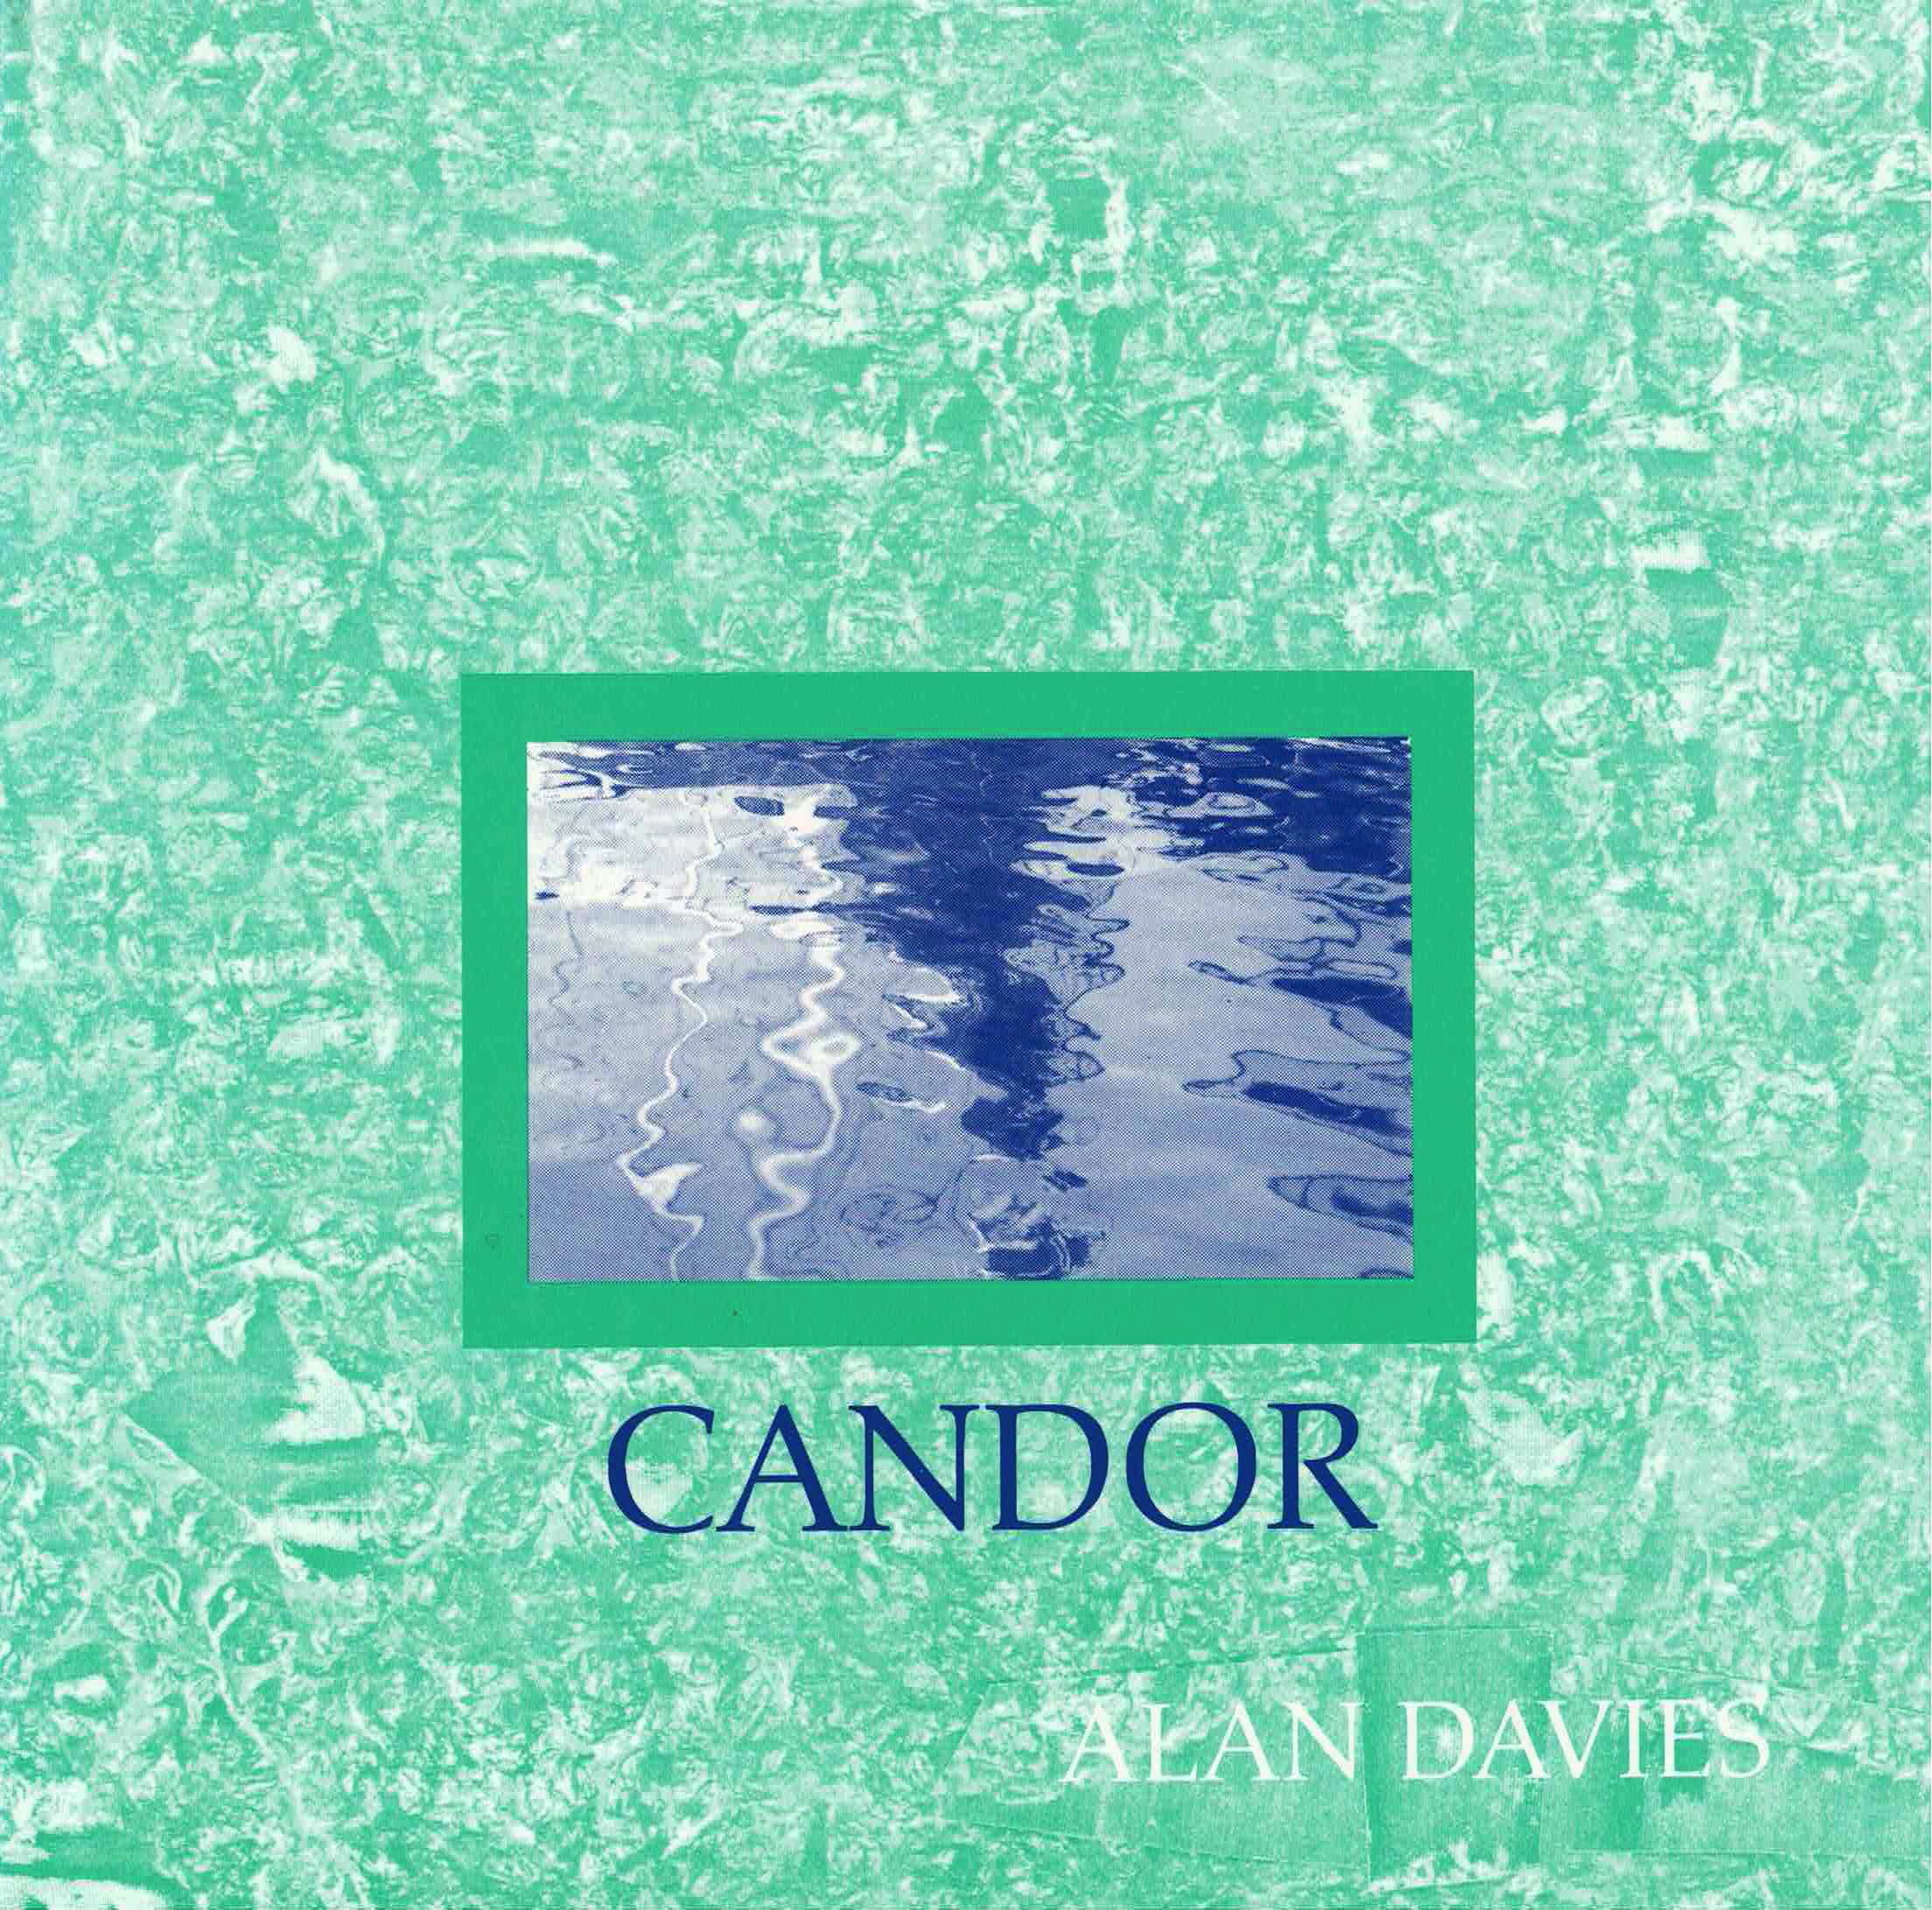 cover of Candor by Alan Davies; mint green sponged textured background, square image of blue rippling water outlined with solid mint green near the center, book title is centered under the square in deep blue all caps typed text, author name is right justified at the bottom in all caps white tyeped text